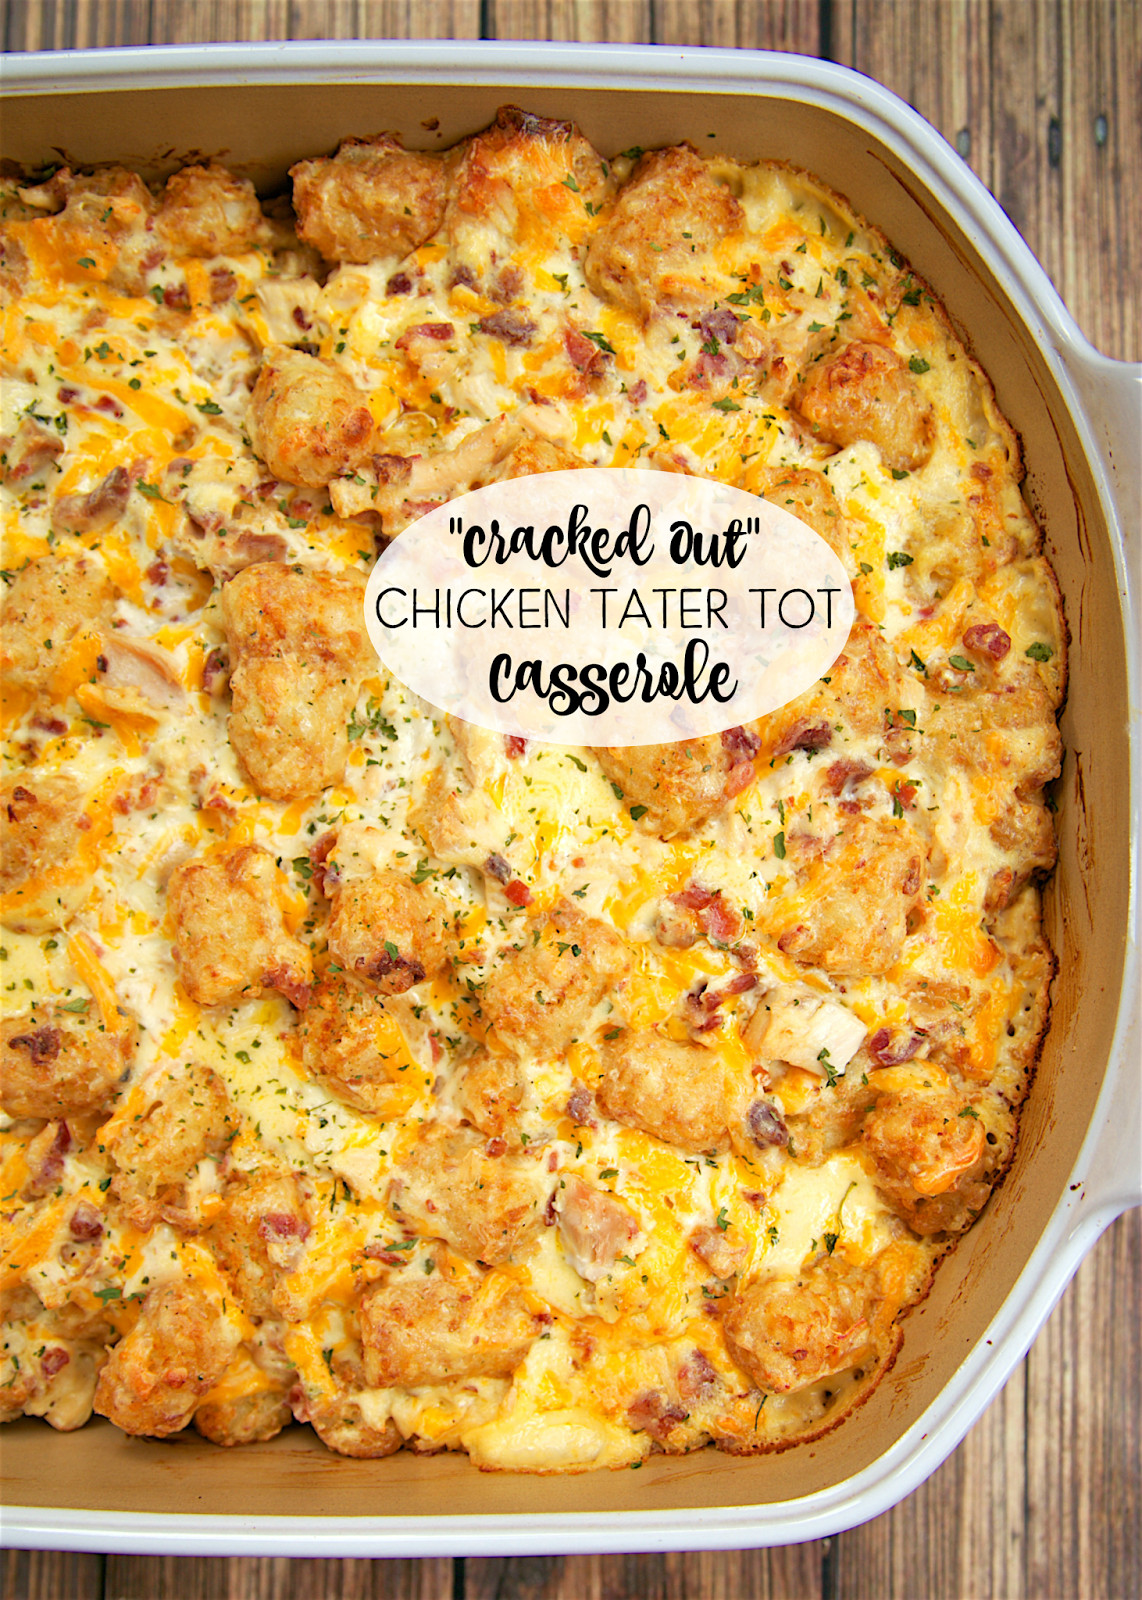 Cracked Out Chicken Tater tot Casserole Awesome Cracked Out Chicken Tater tot Casserole